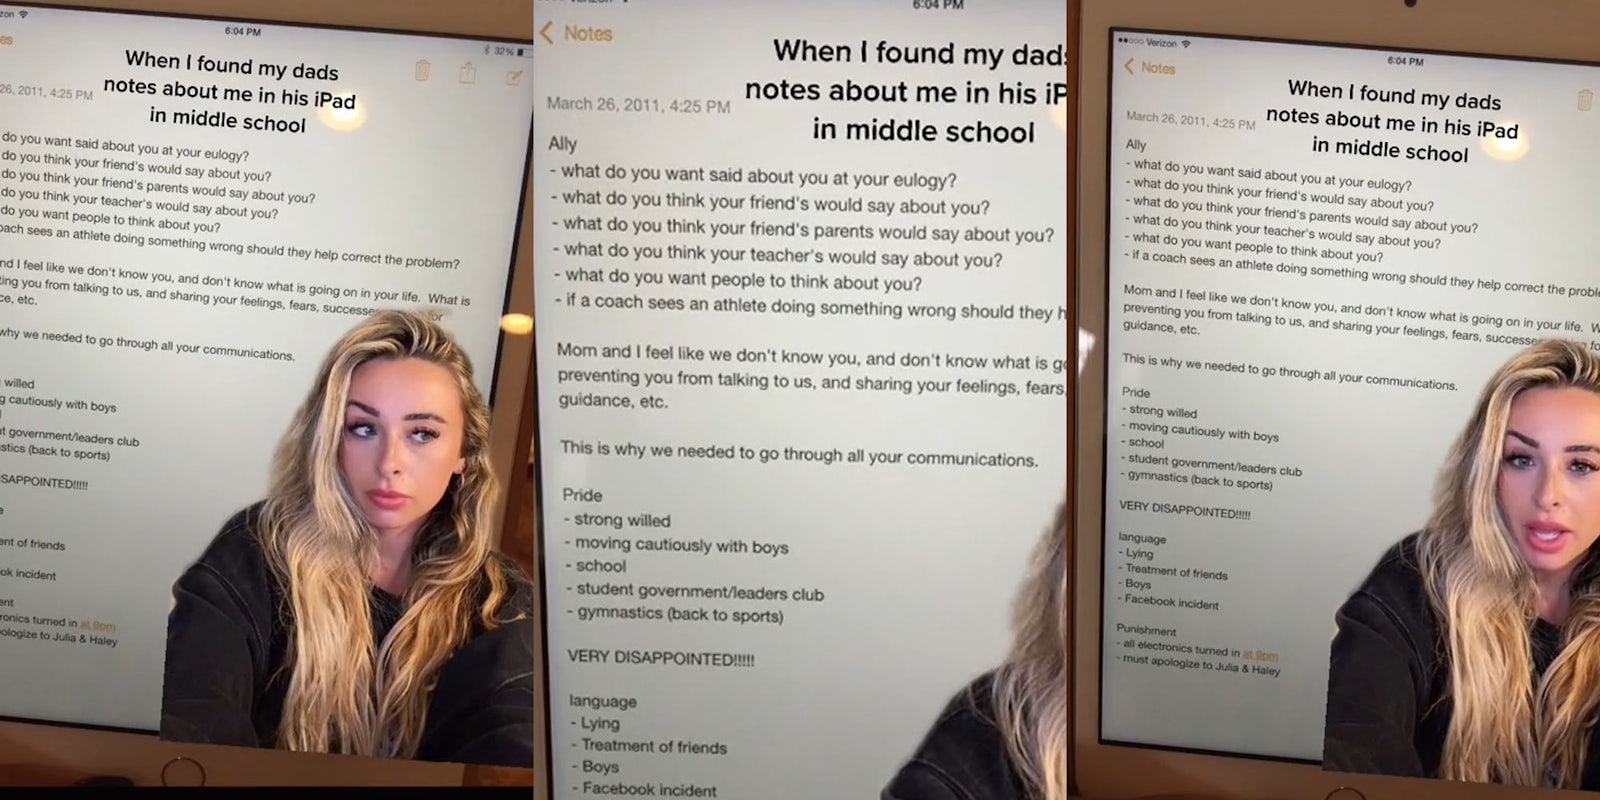 Female greenscreen tiktok video over iPad notes caption ' When I found my dad's notes about me in his iPad in middle school' (l) naughty list on iPad screen caption ' When I found my dad's notes about me in his iPad in middle school'(c) female greenscreen over iPad notes caption ' When I found my dad's notes about me in his iPad in middle school'(r)